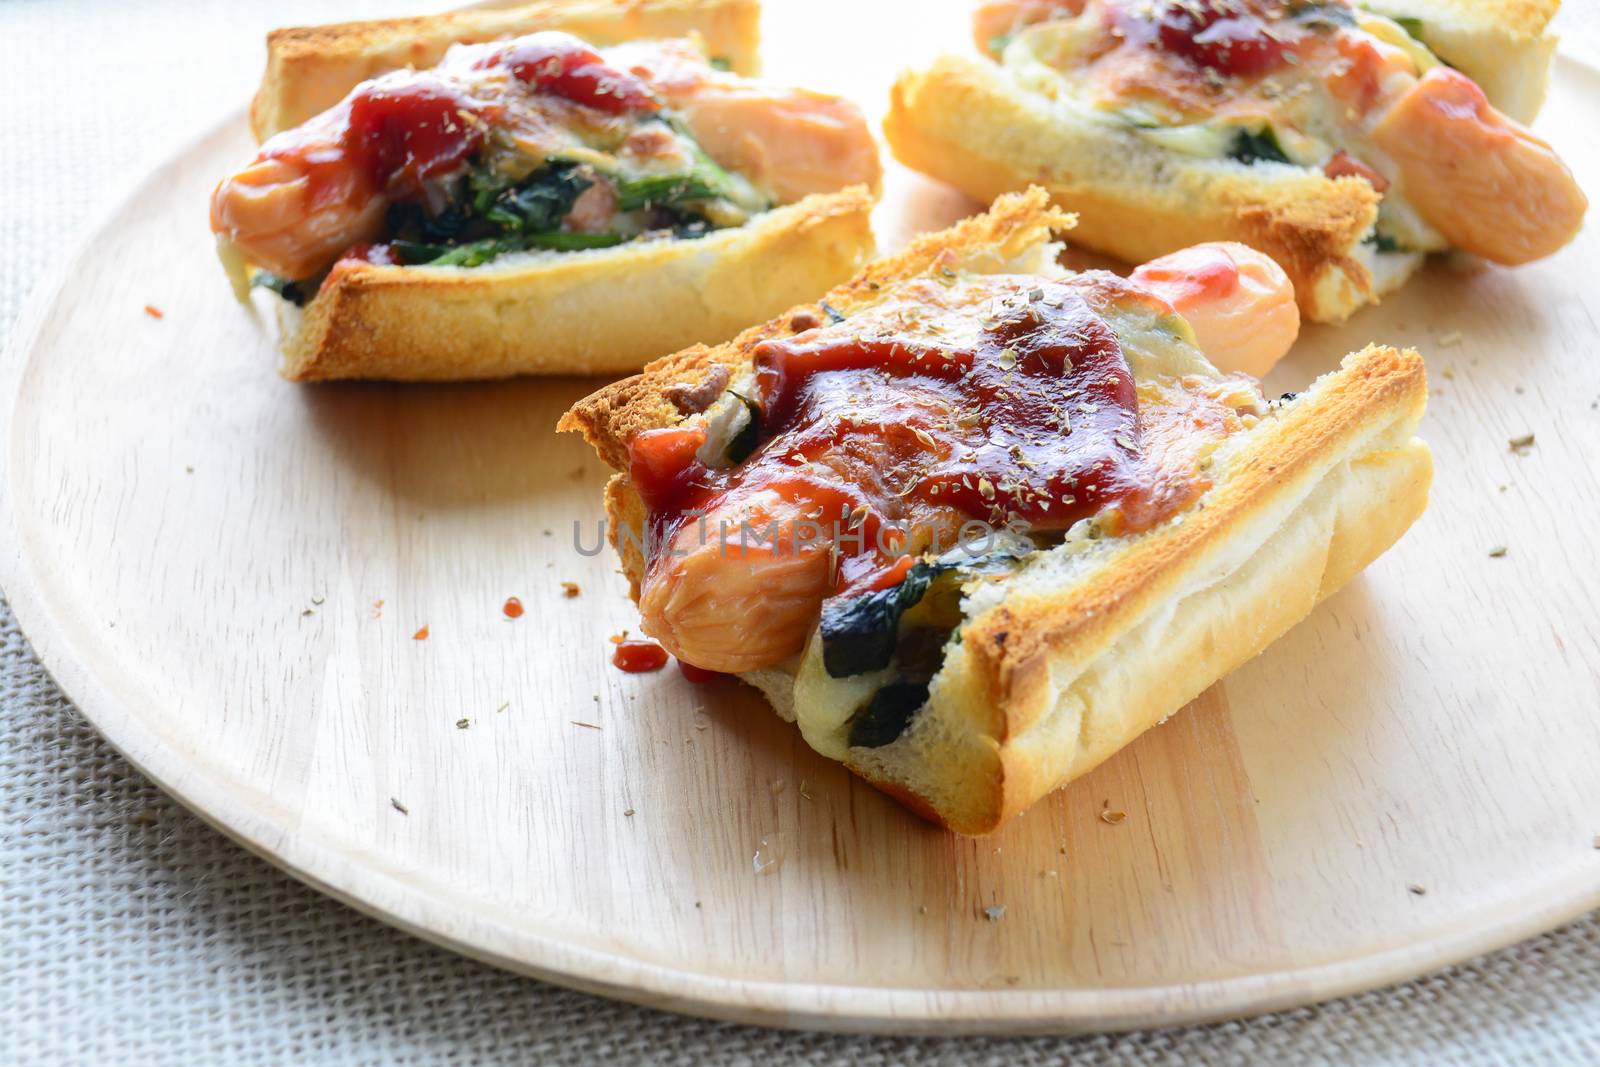 Baked Spinach with Cheese, sausage on Baguette, French bread
